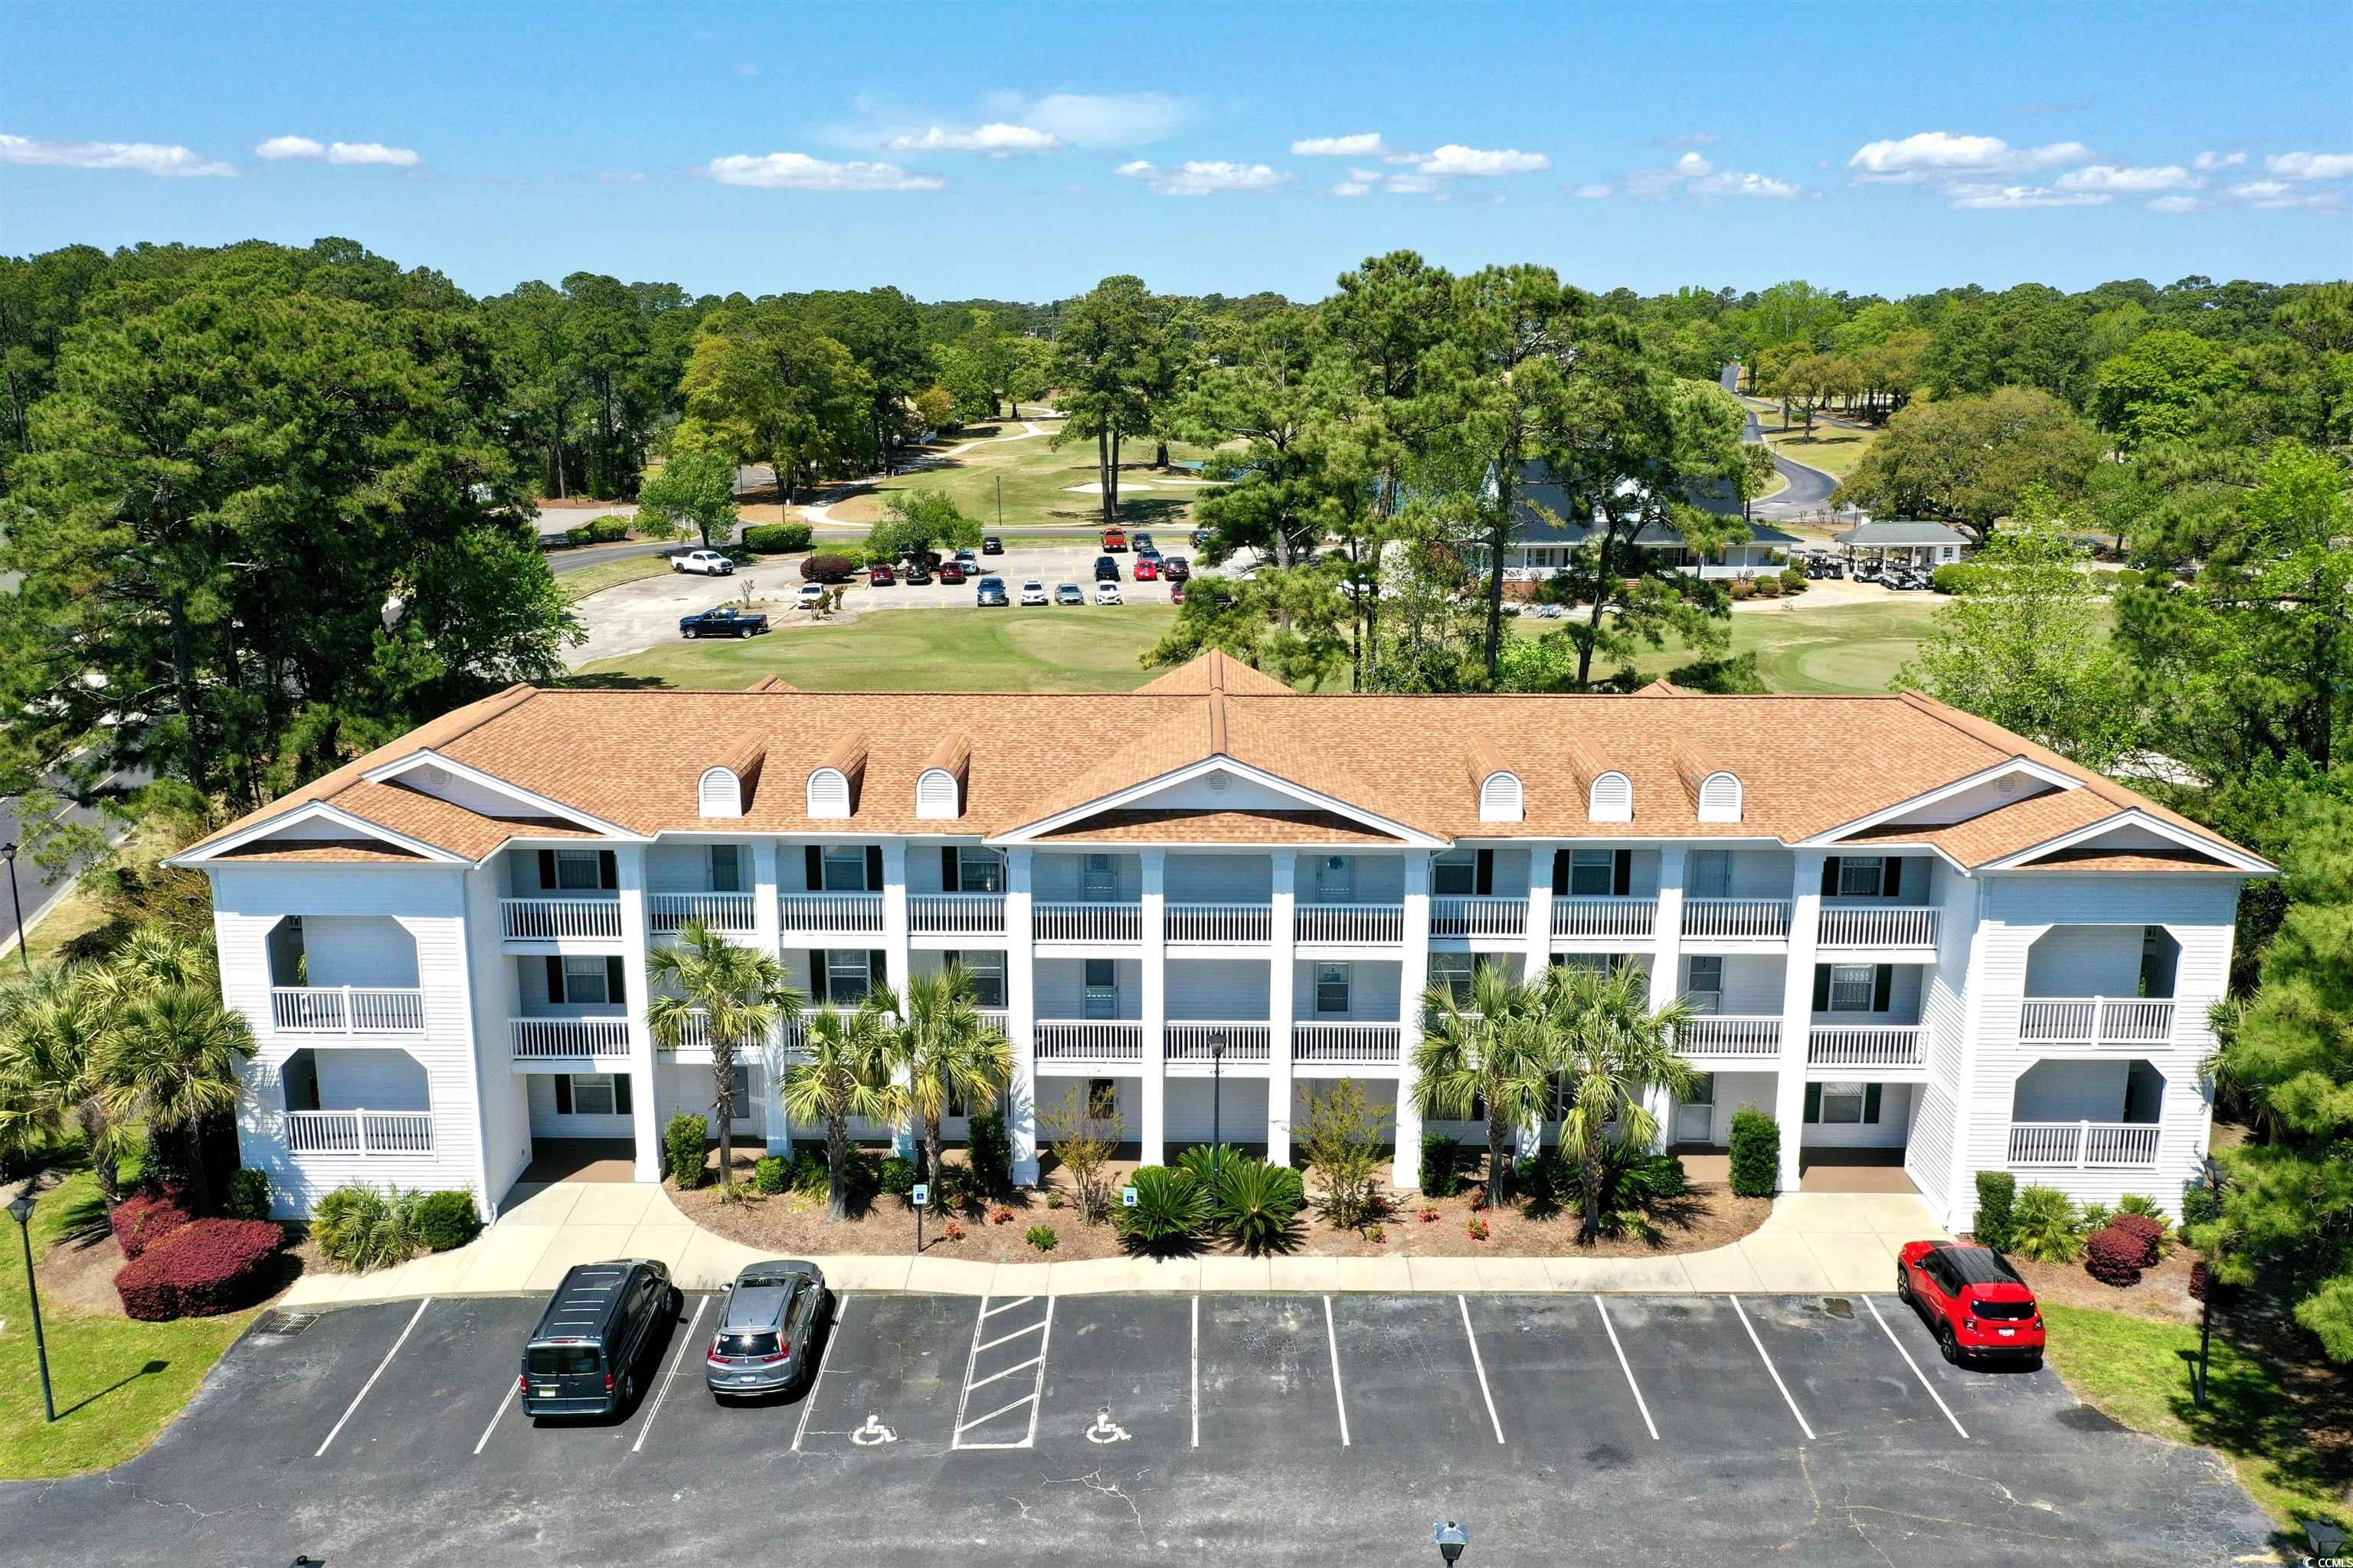 this beautiful first floor condo is located in the well known eastport golf community. it is in the heart of little river, sc and has easy access to all the shops, restaurants, entertainment, and golf little river and north myrtle beach, sc has to offer. great second home or investment property income. seller has never rented out the property. nice relaxing view of a pond and golf course from the screened porch. well maintained building with short walk to community pool. buyer is responsible for all measurement verification's.